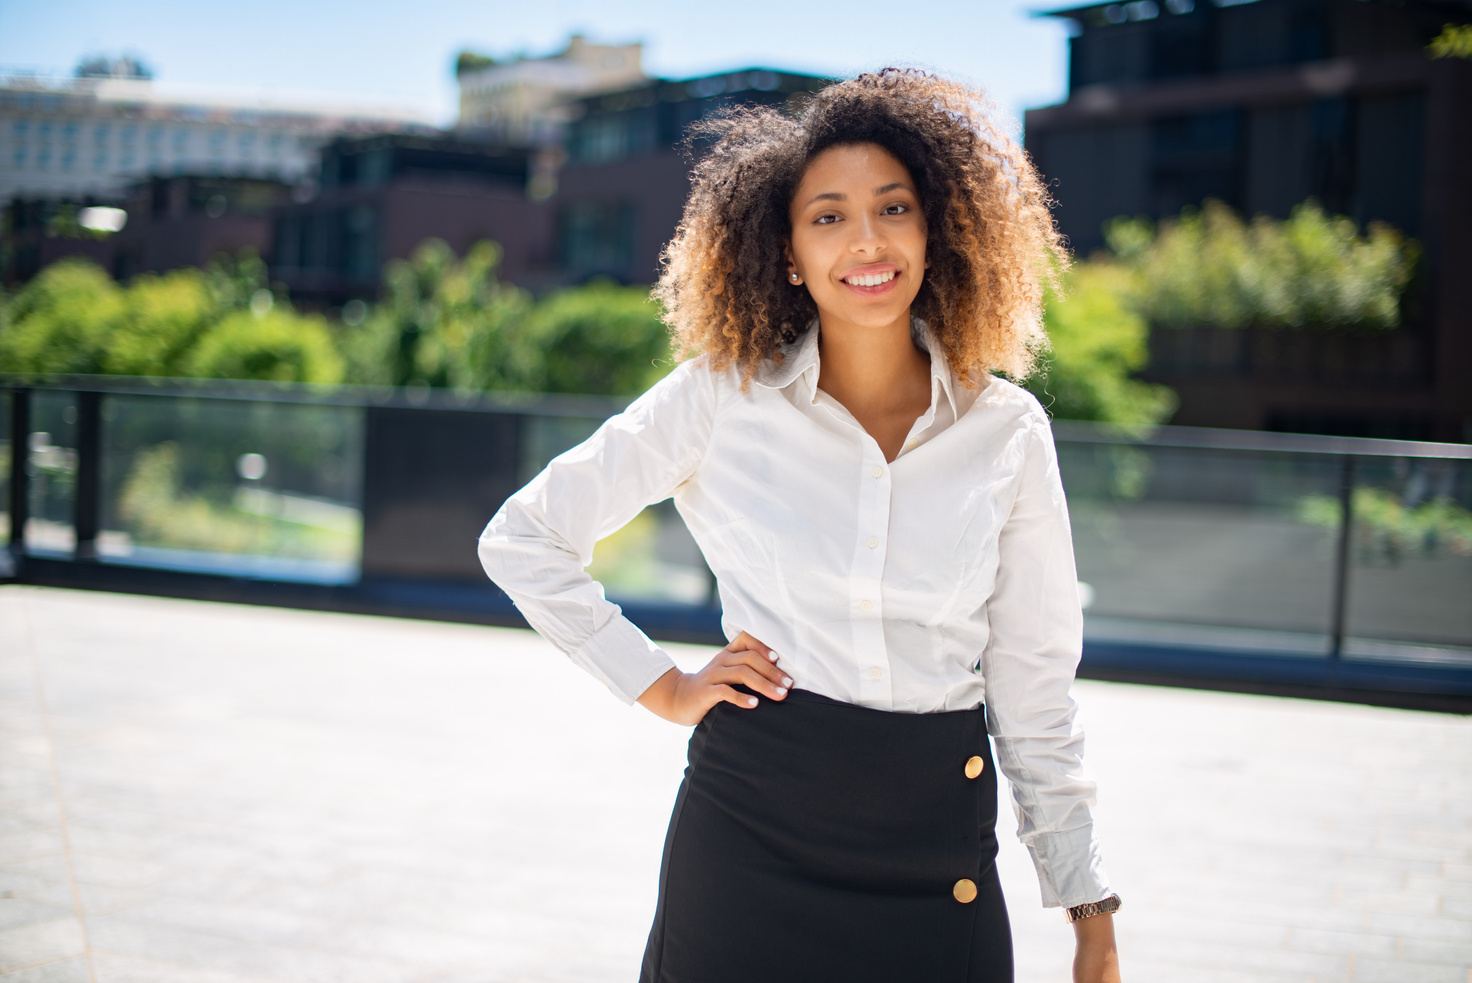 Black Business Woman in a Business Environment